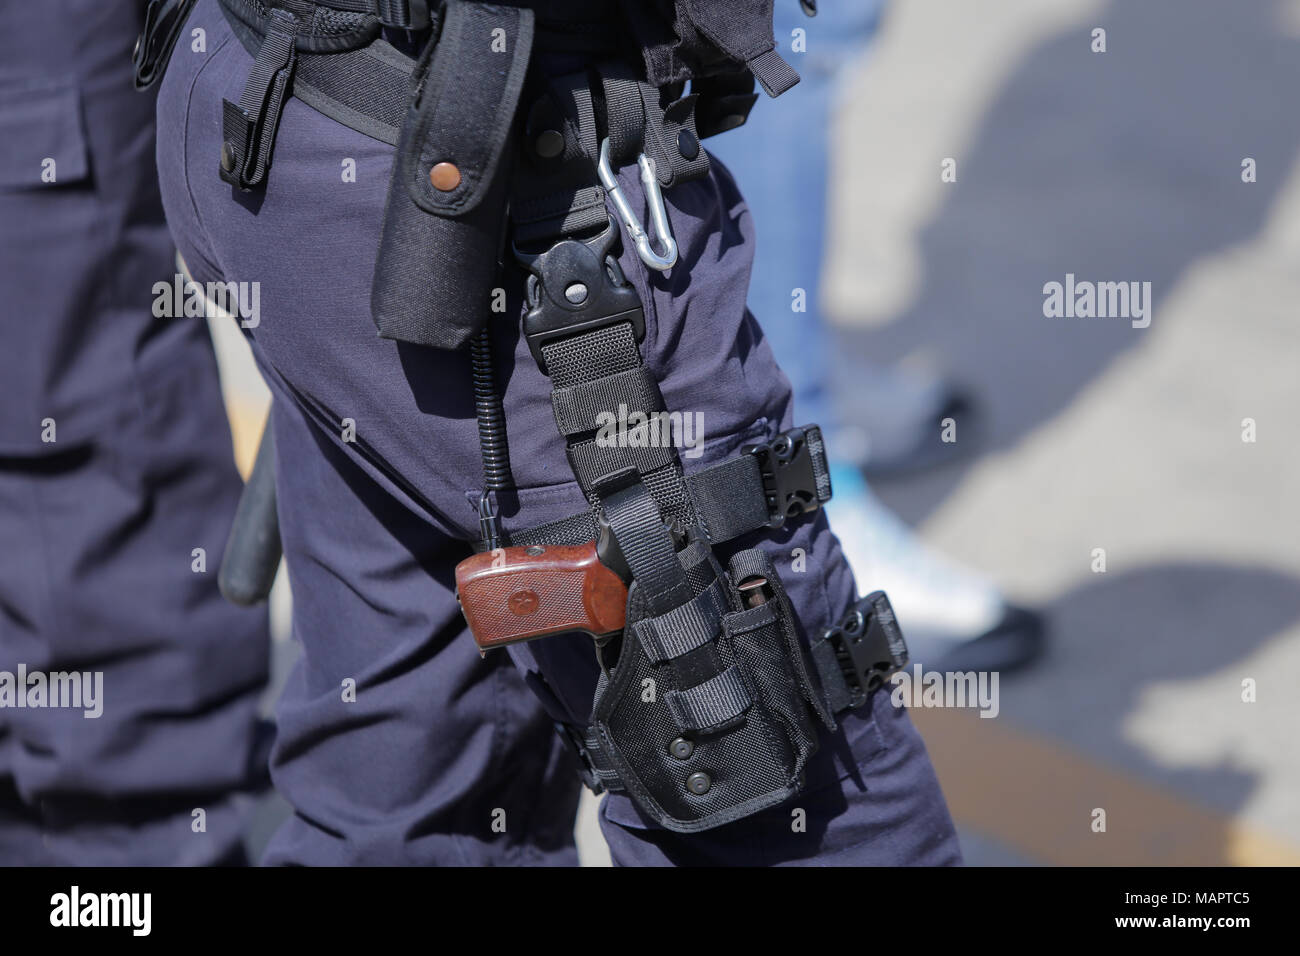 Details of the security kit of a police officer Stock Photo